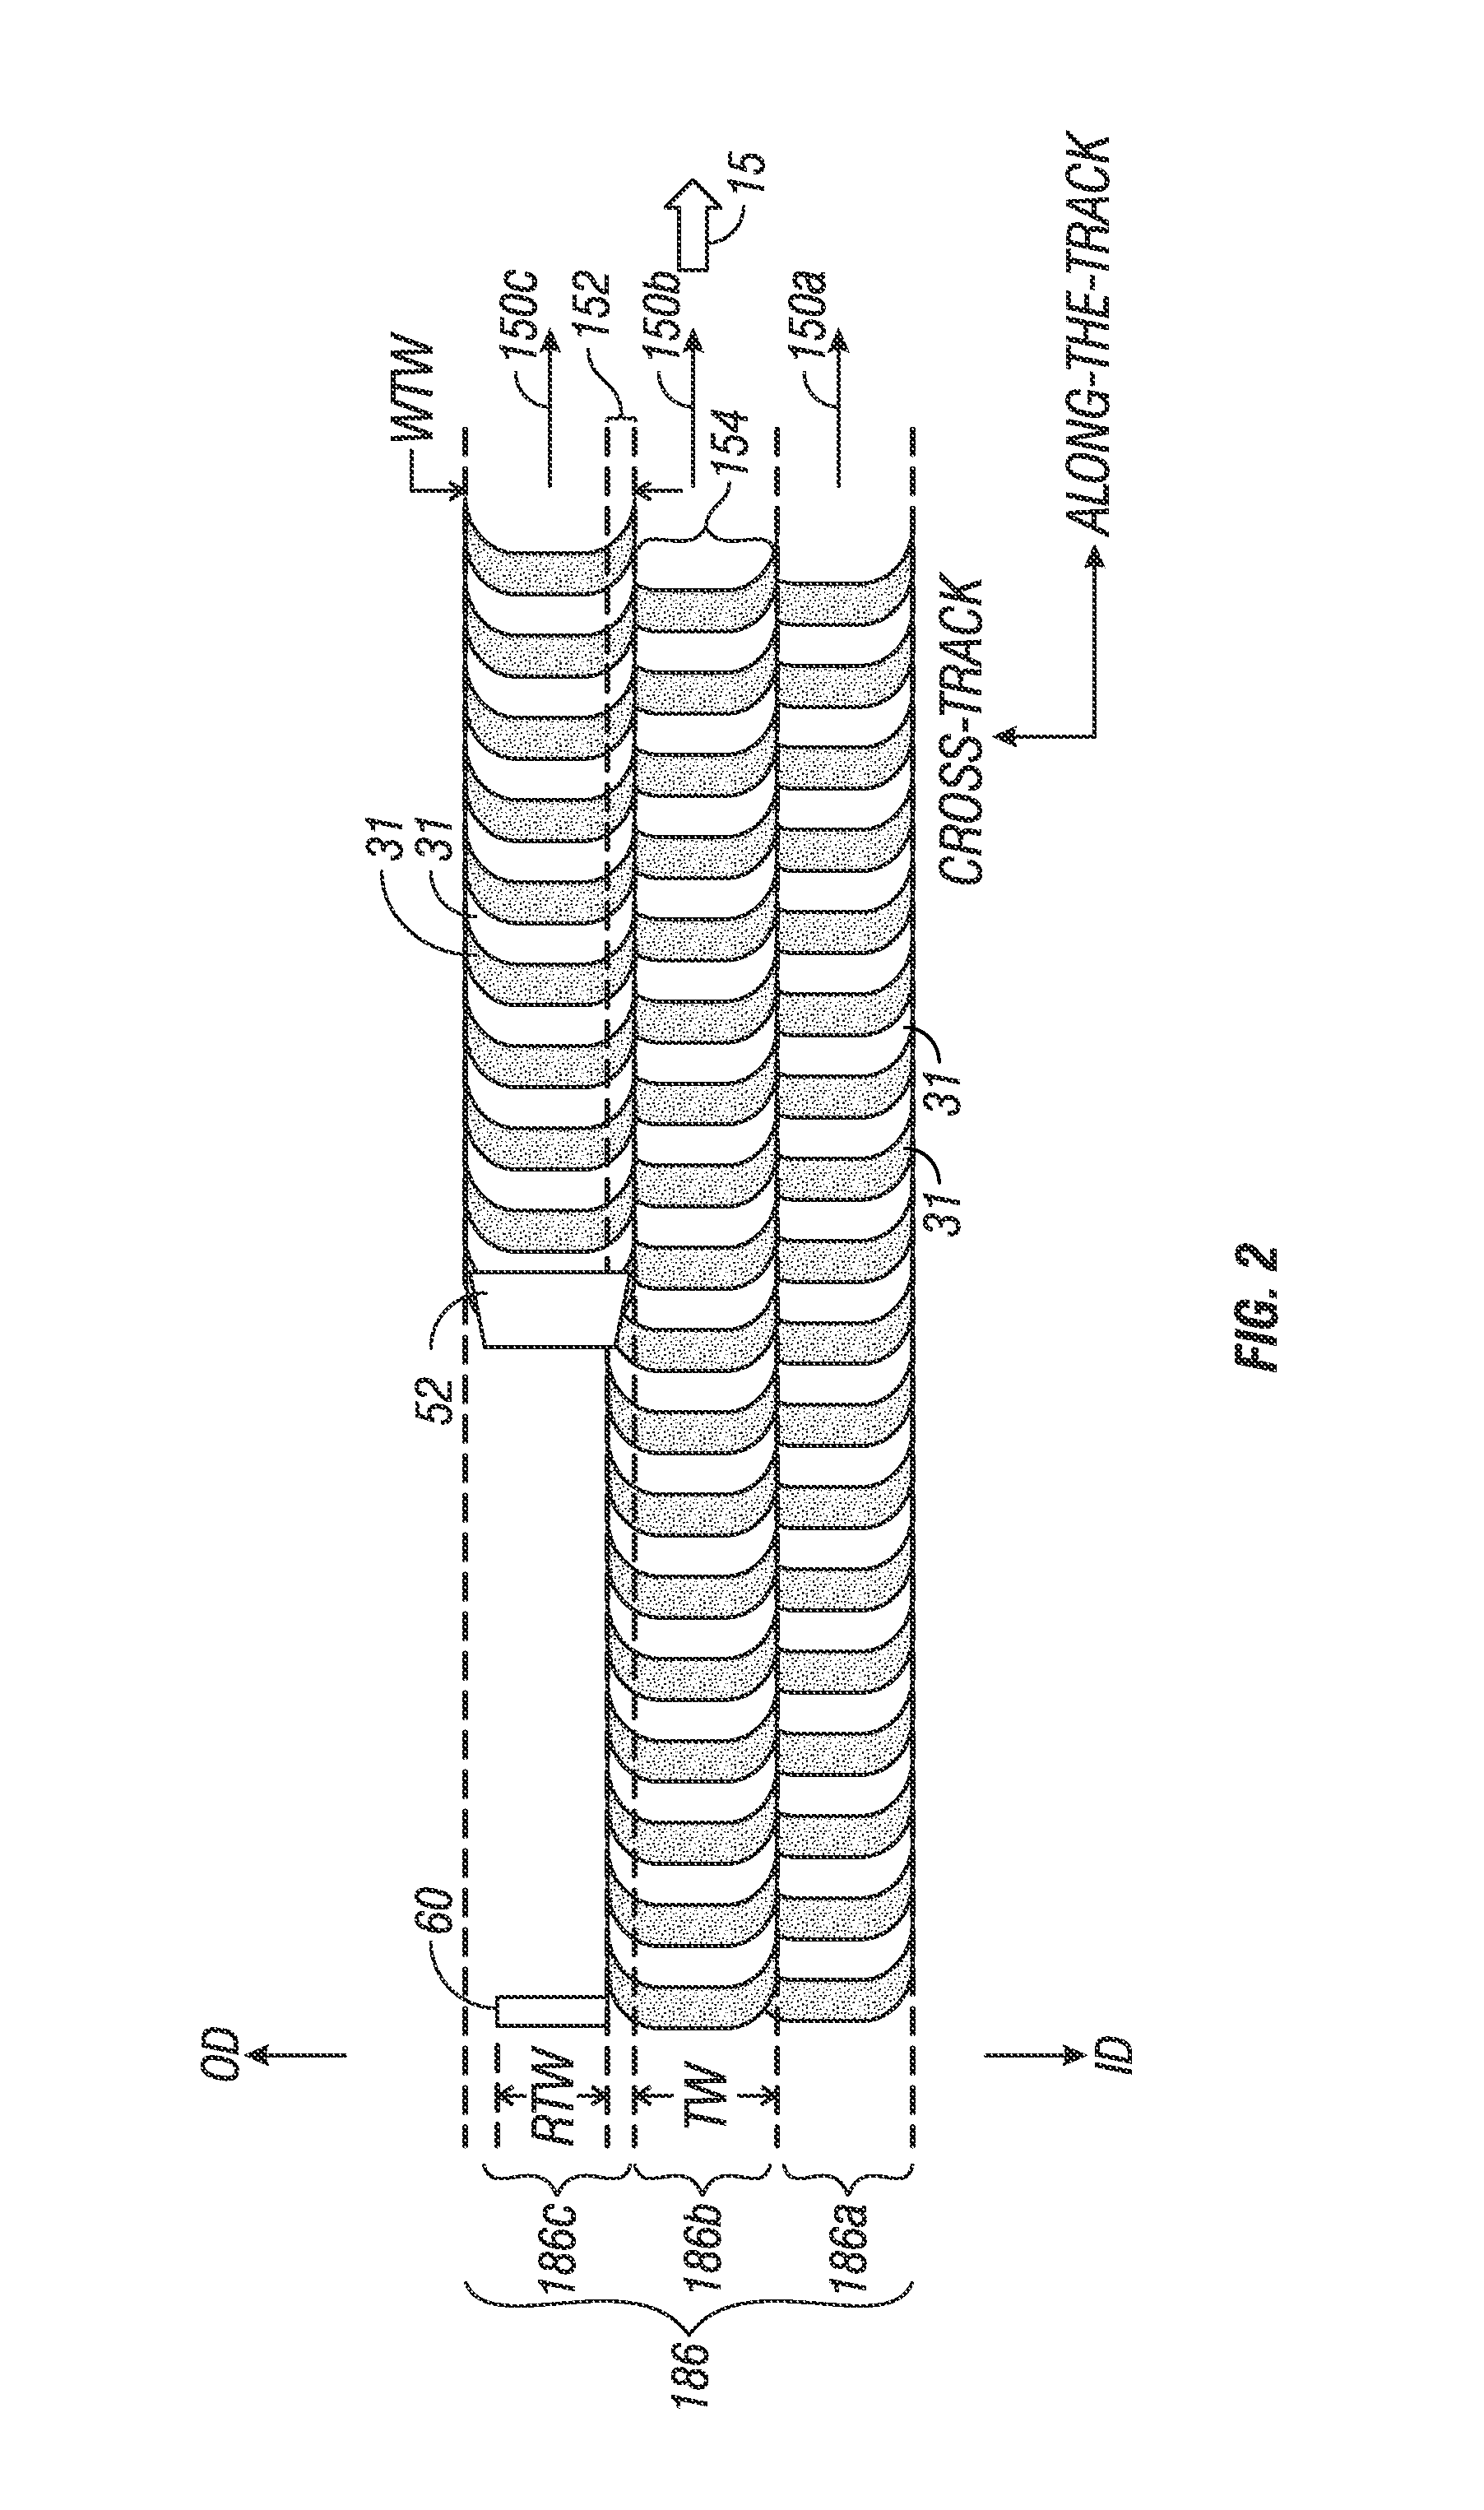 Shingled magnetic recording (SMR) disk drive with verification of written data